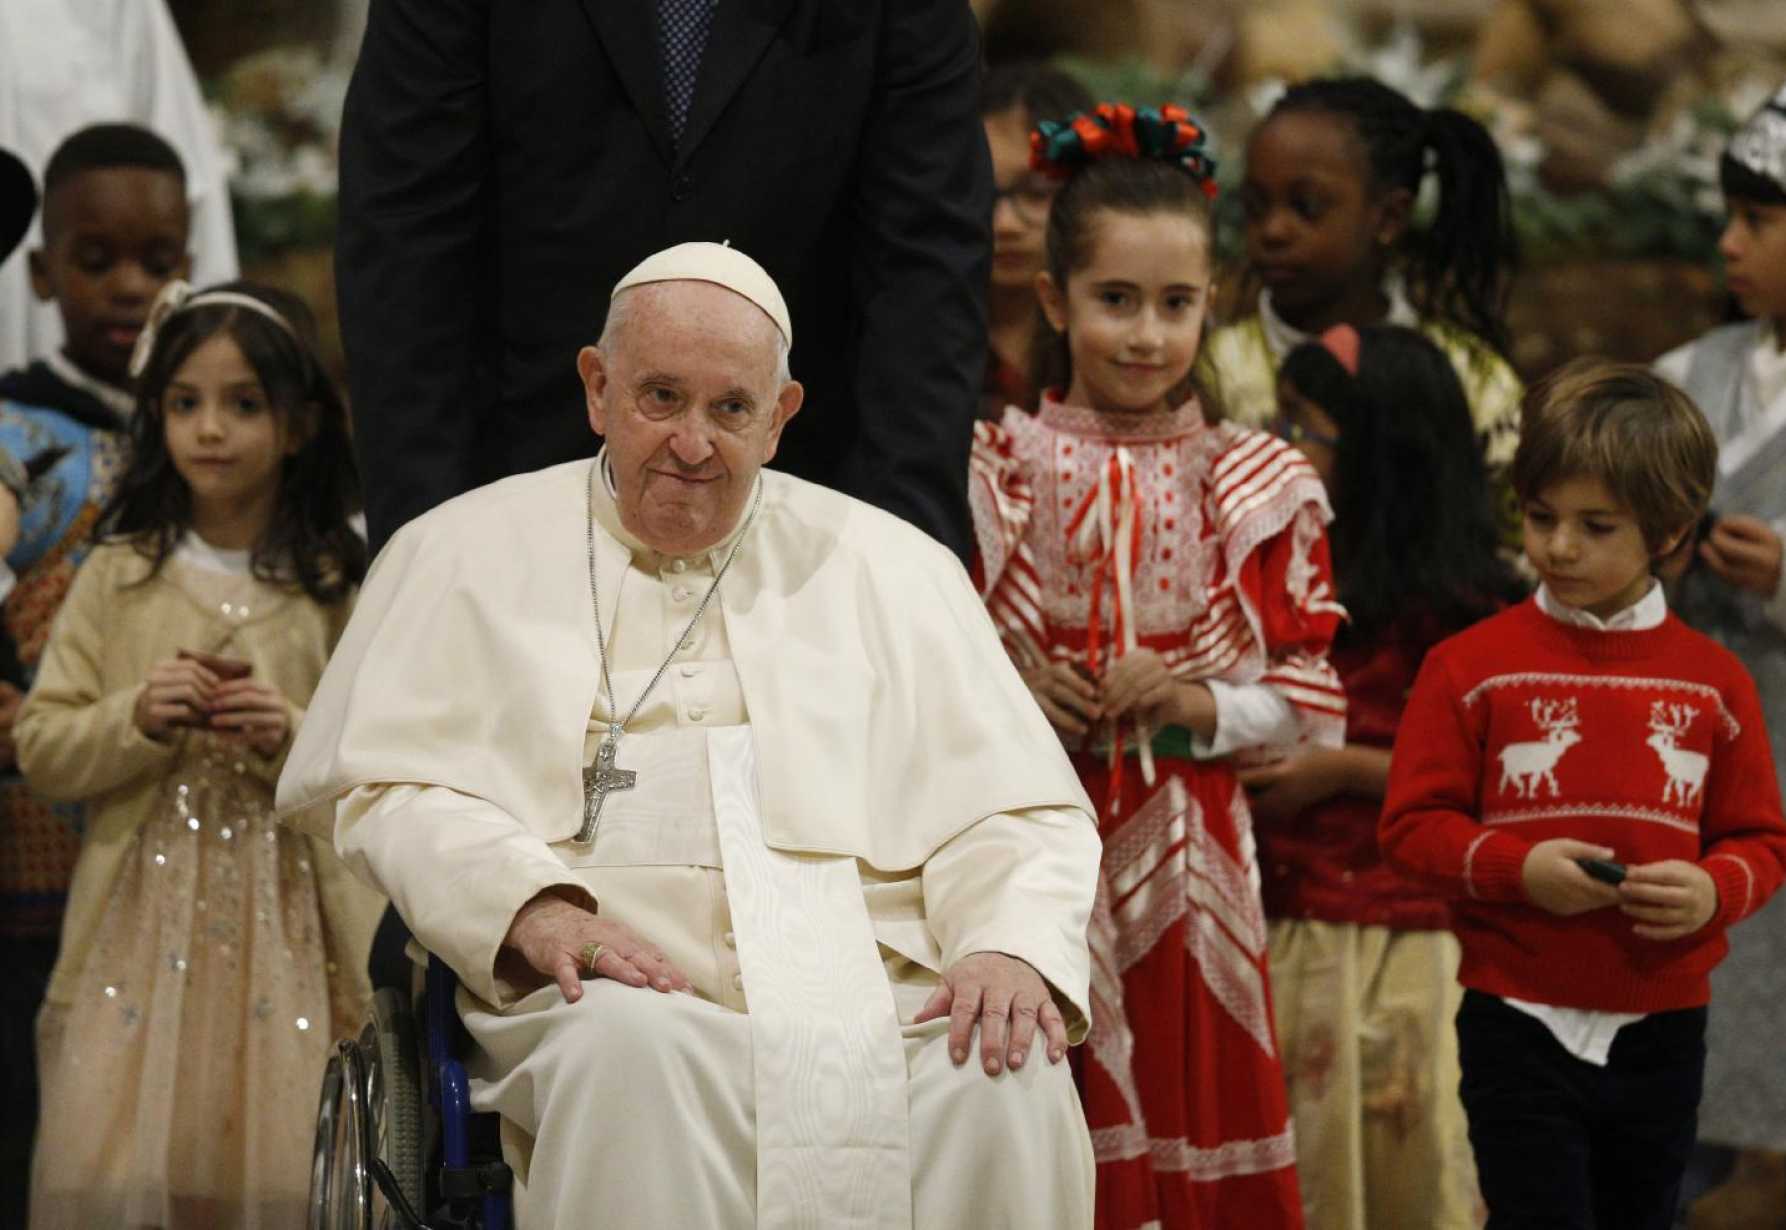 Bring hope to others, justice for the poor, pope says at Christmas Mass